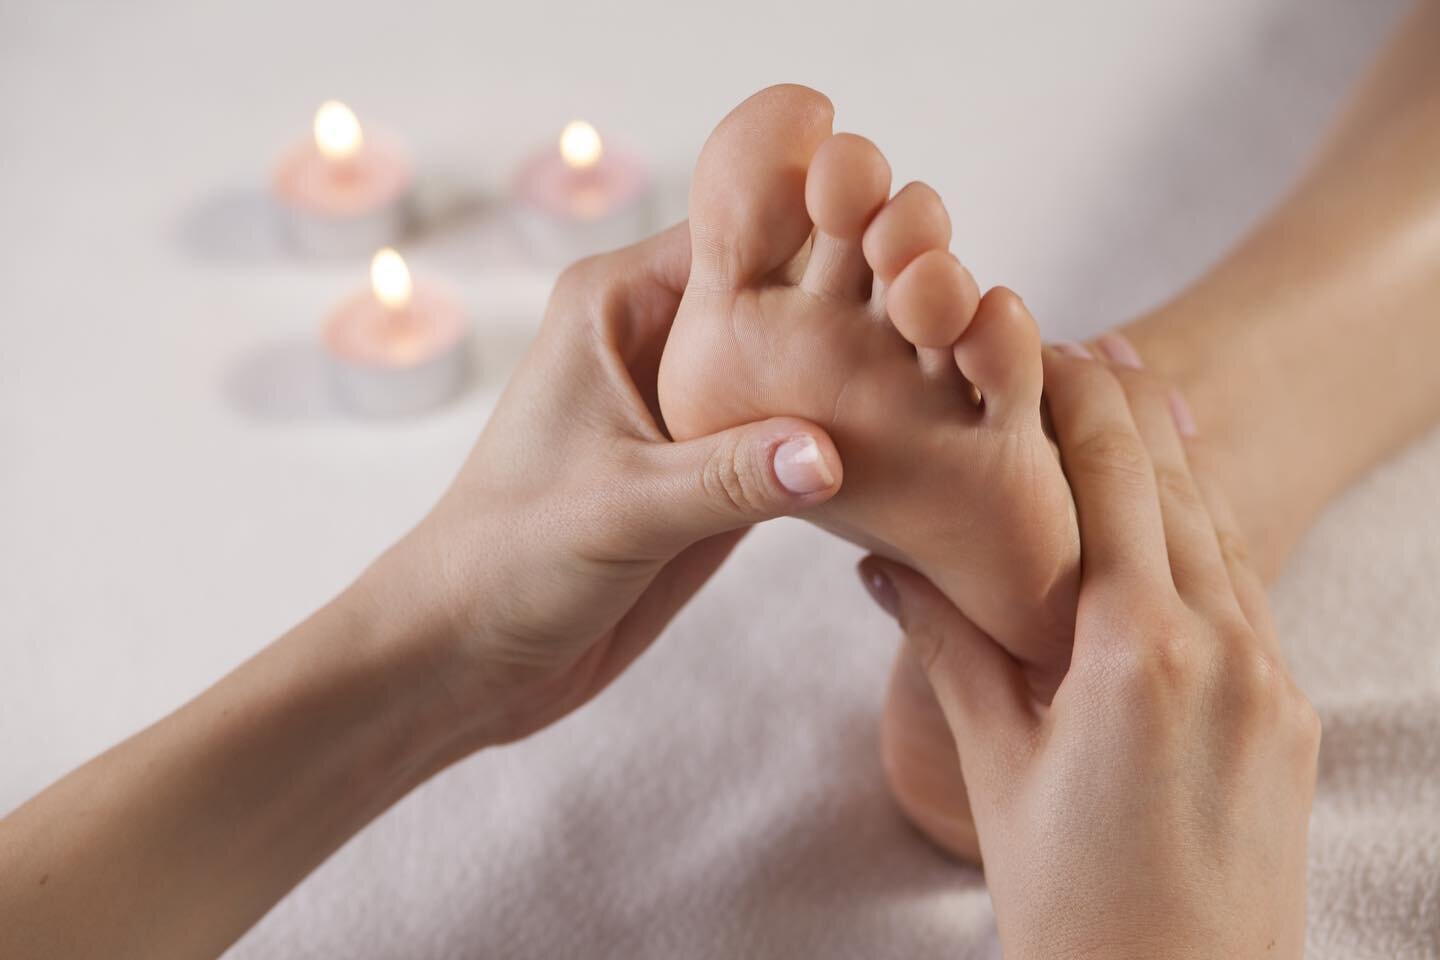 Sunday Funday. It&rsquo;s time to put your feet up and relax. Book your appointment online now for an hour of luxury relaxation at LA&rsquo;s best foot spa.
.
.
.
#spa #massage #massagetherapy #relax #relaxing #relaxation #mindfulness #mindful #menta